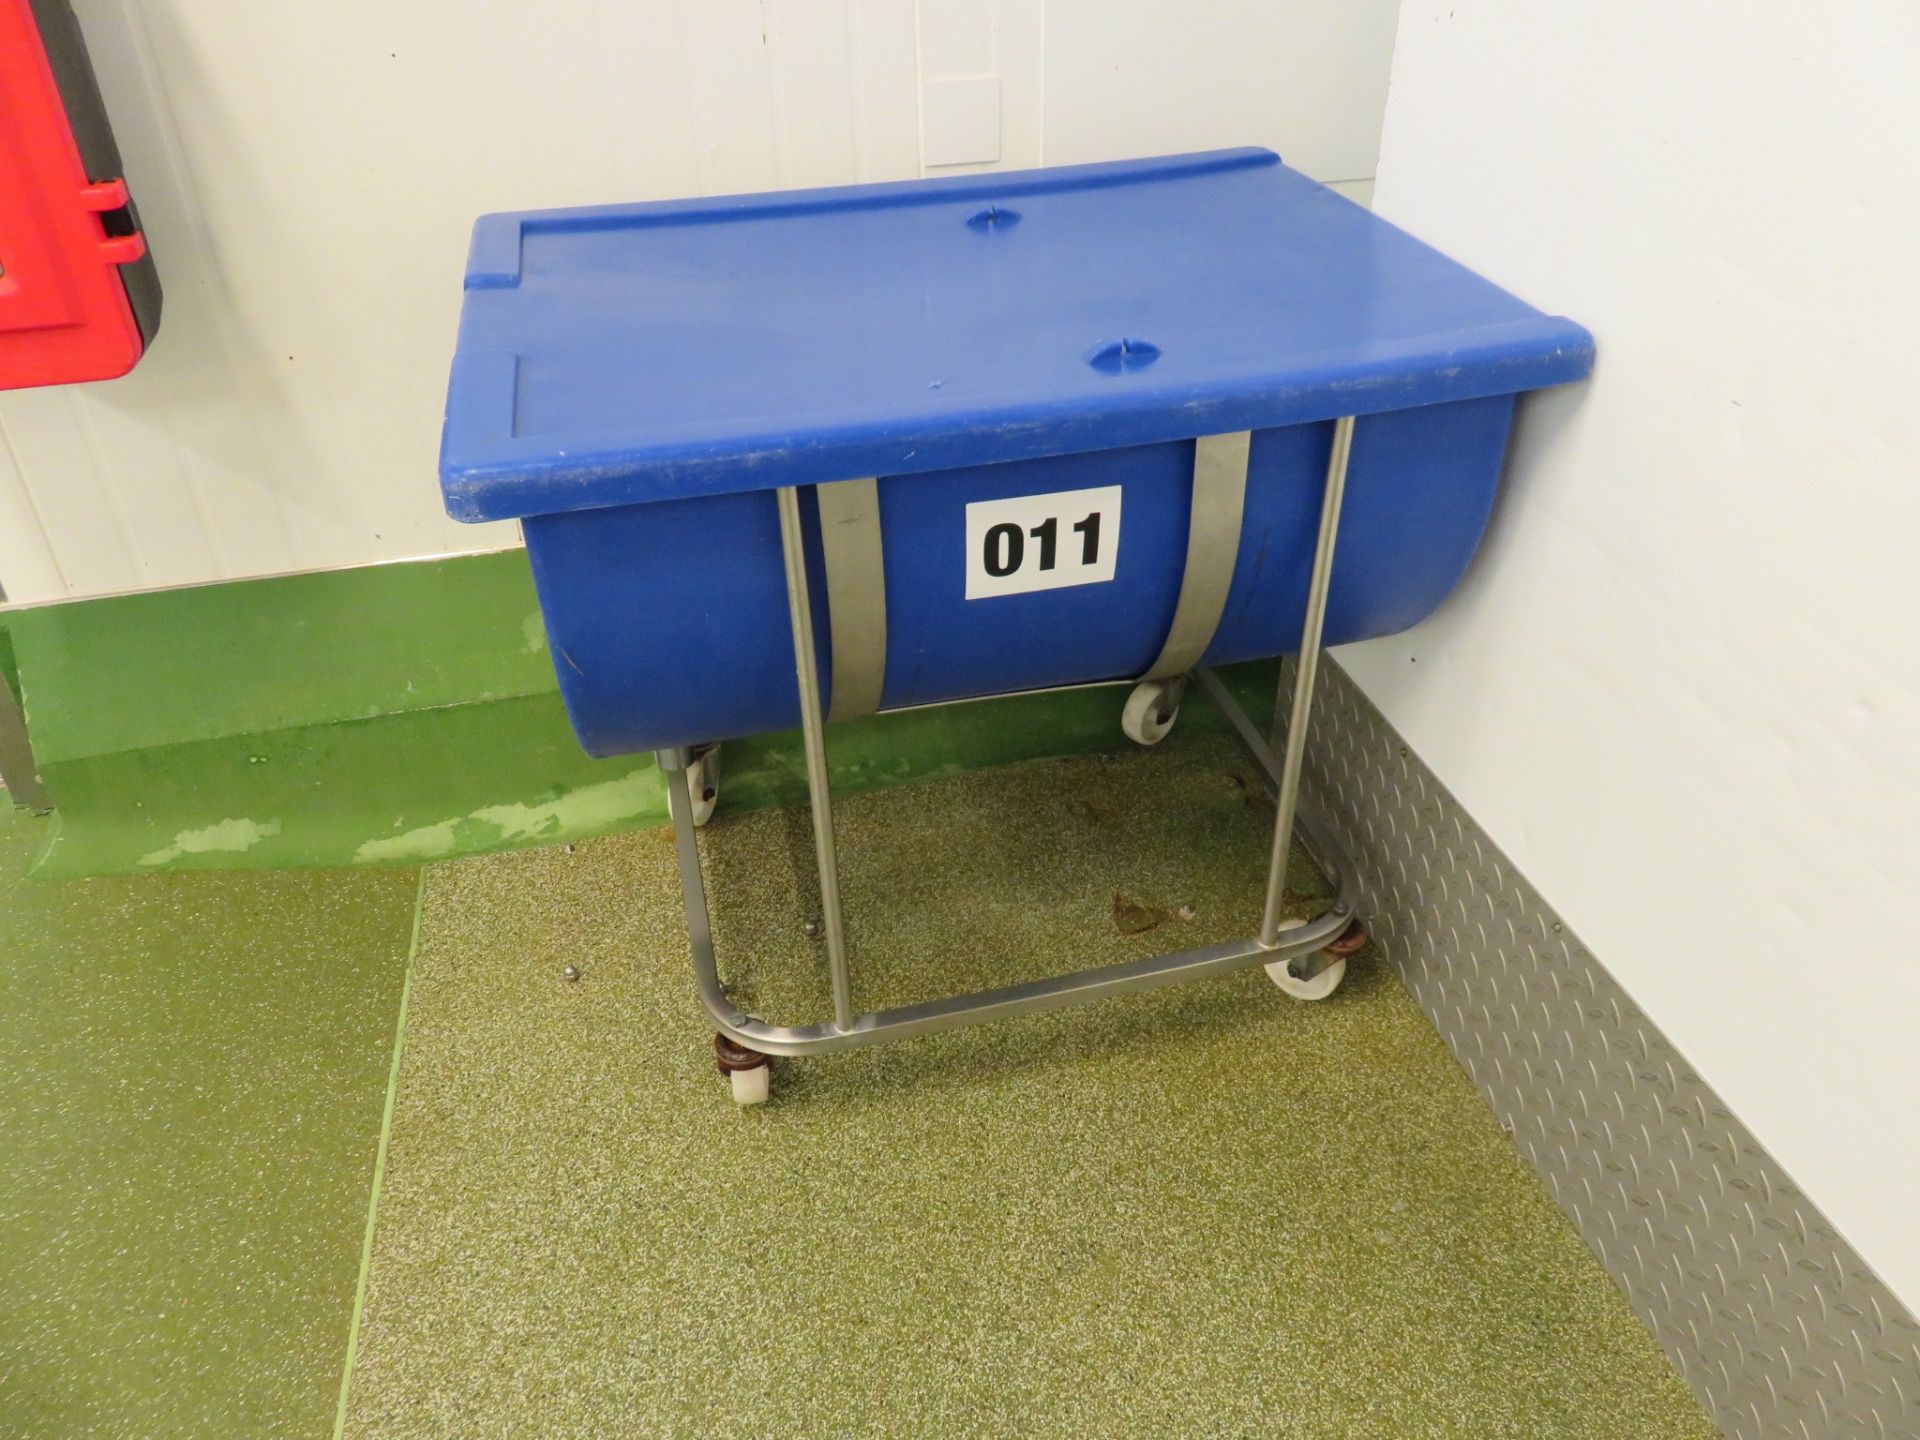 S/s mobile trough holder 750 x 950mm with plastic trough with lid. Lift out £10